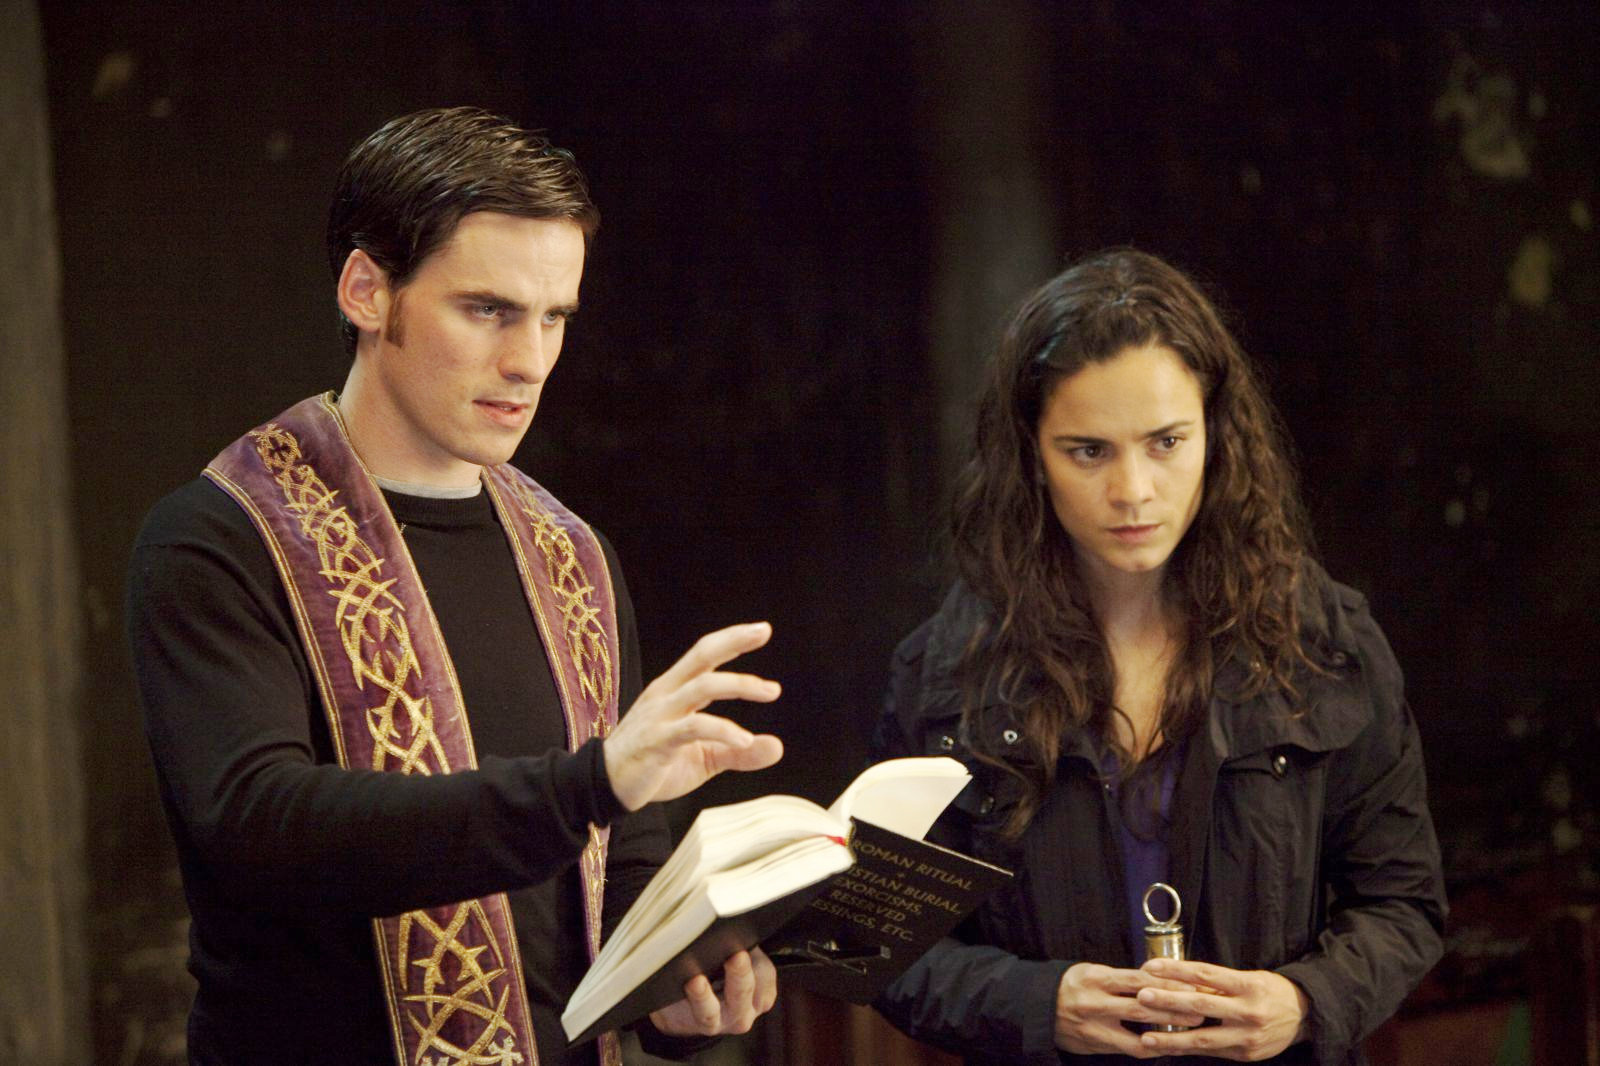 Colin O'Donoghue stars as Michael Kovak and Alice Braga stars as Angeline in Warner Bros. Pictures' The Rite (2011). Photo credit by Egon Endrenyi.